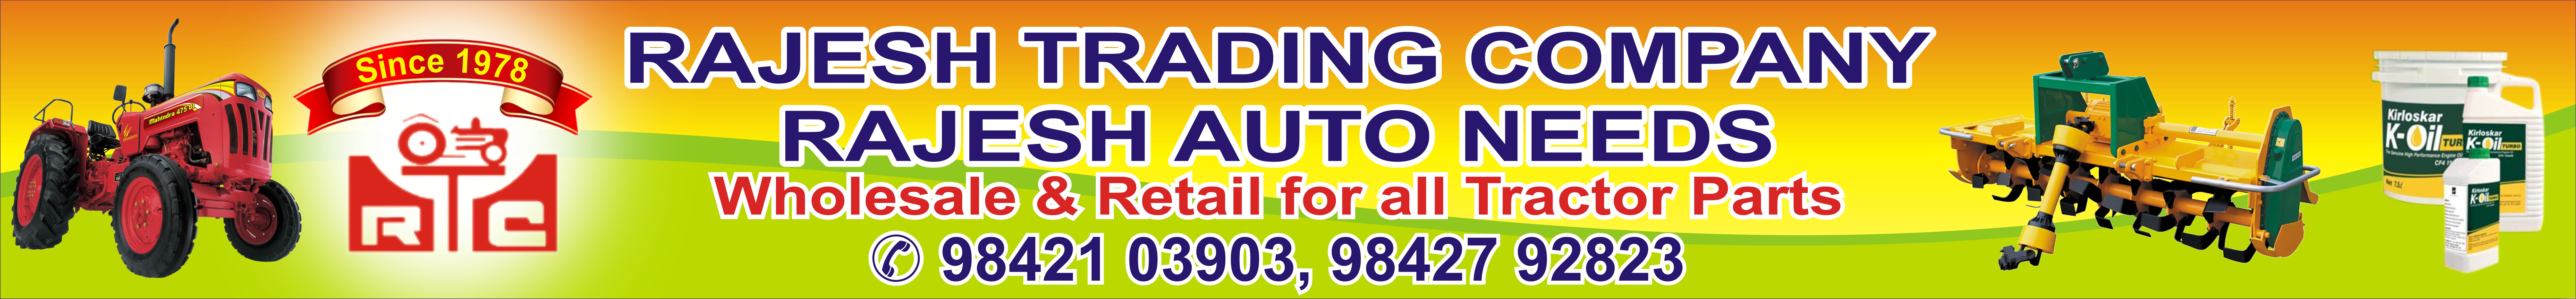 RAJESH TRADING COMPANY,  <br> WHOLESALE & RETAIL FOR ALL TRACTOR PARTS